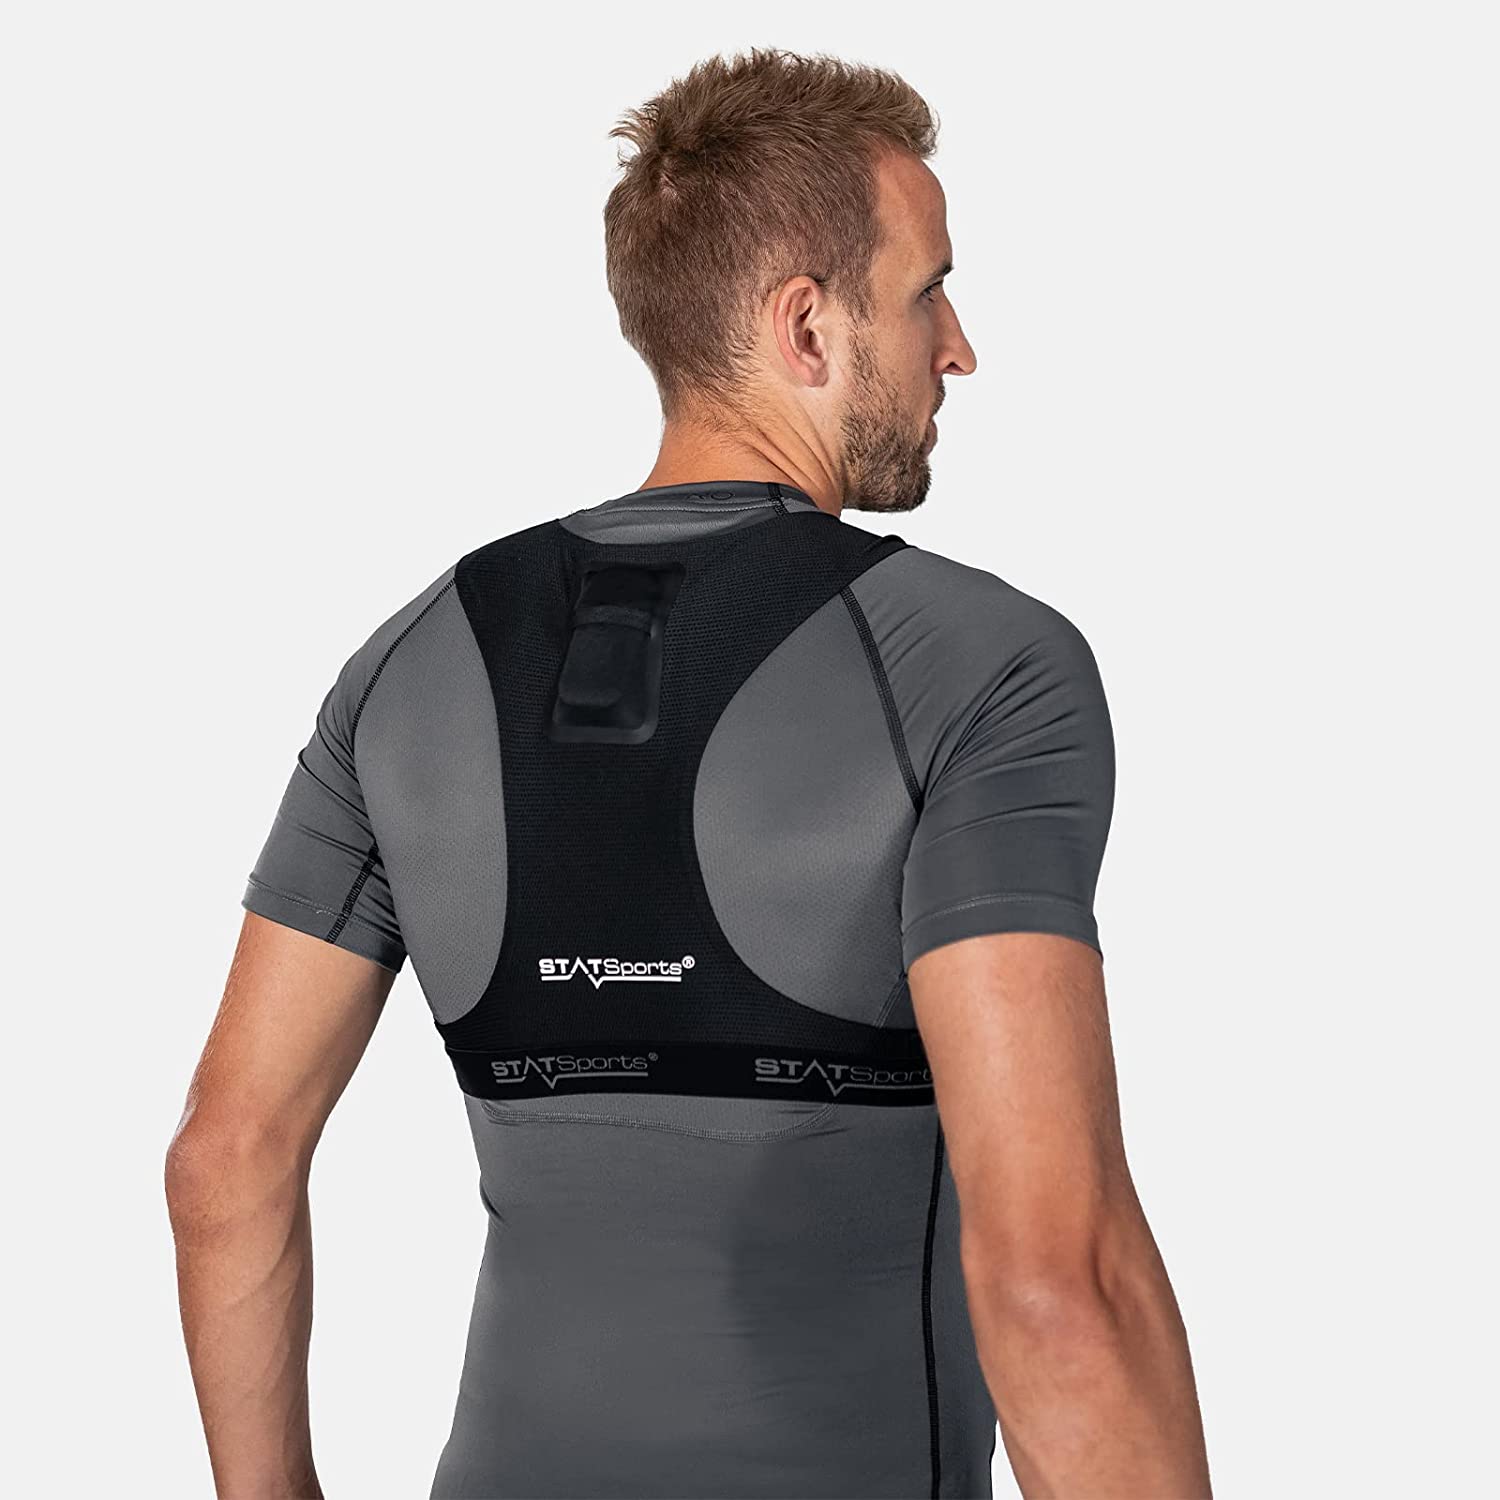  STATSports APEX Athlete Series GPS Soccer Activity Tracker  Stat Sports Football Performance Vest Wearable Technology Adult Small :  Sports & Outdoors